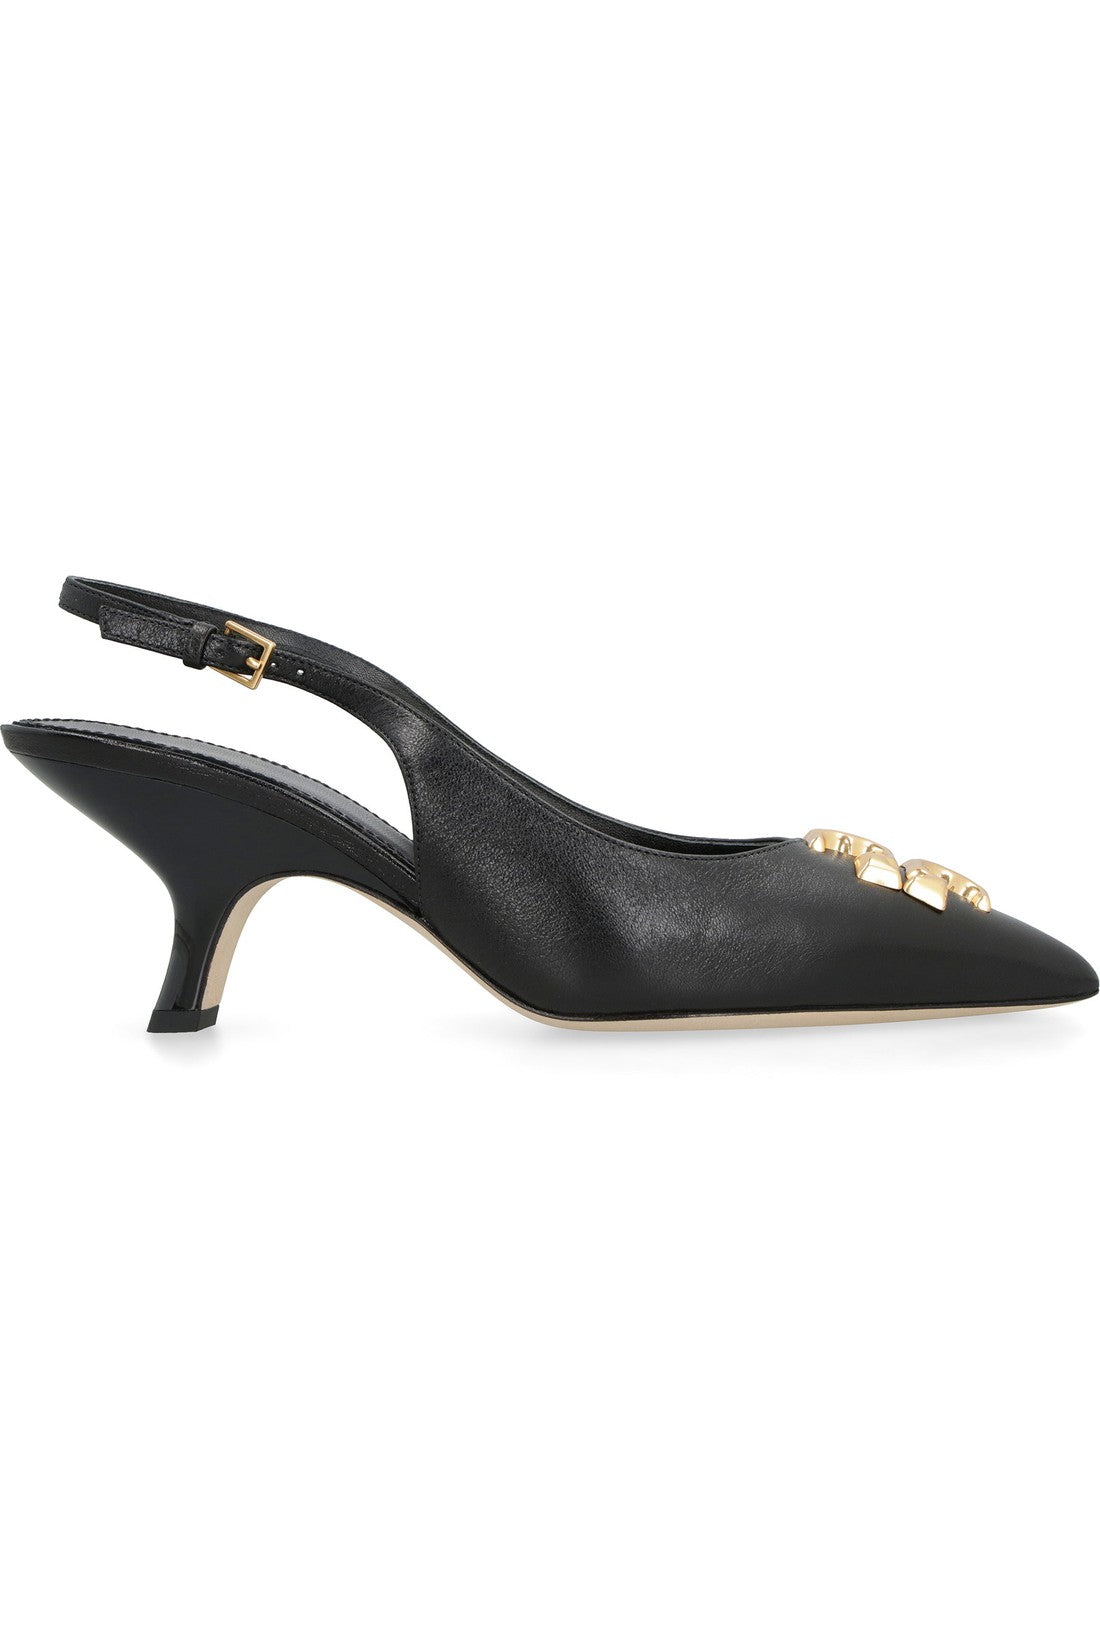 Tory Burch-OUTLET-SALE-Eleanor leather pointy-toe slingback-ARCHIVIST